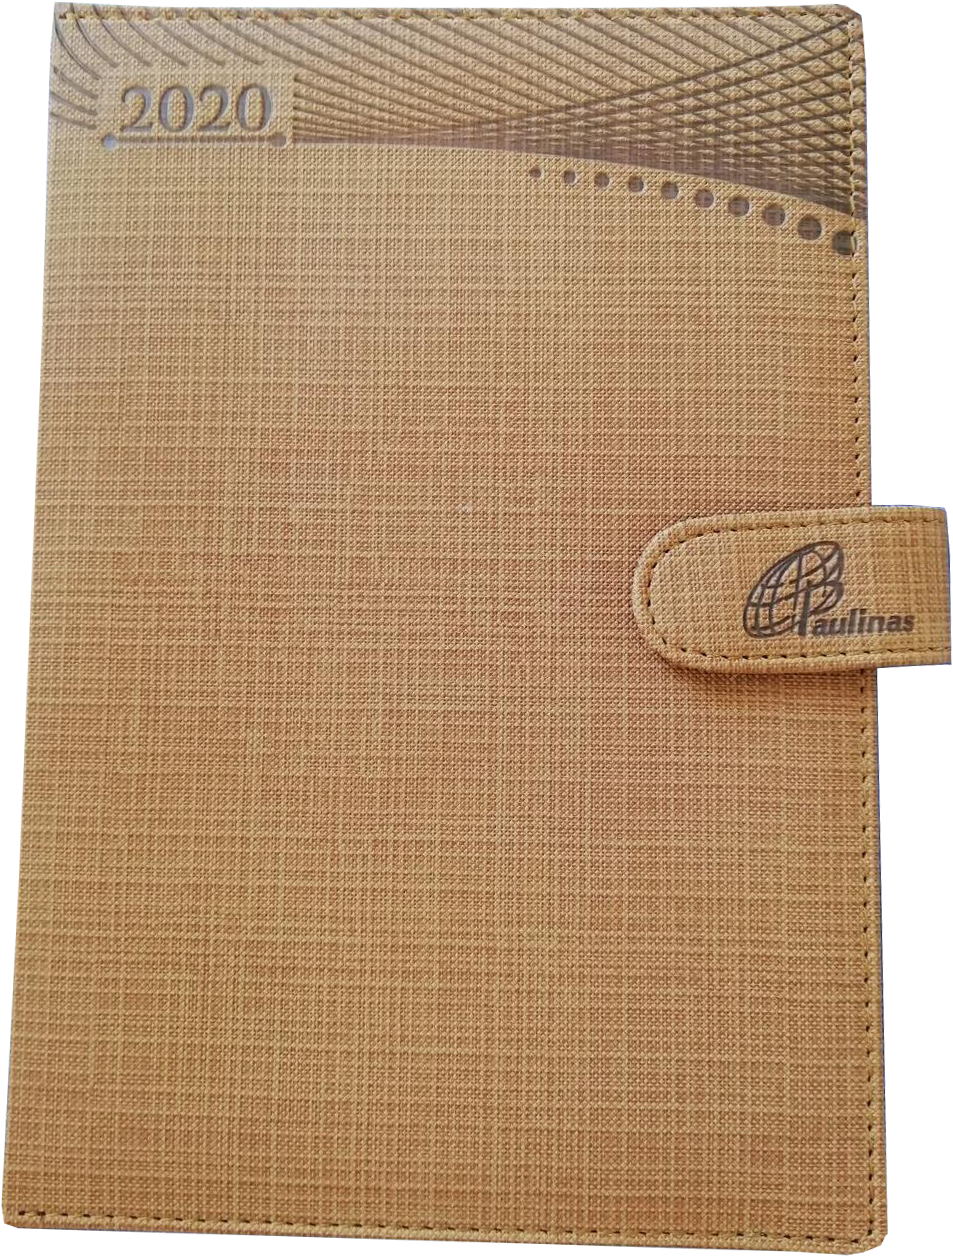 2020 Brown Fabric Agenda Cover PNG